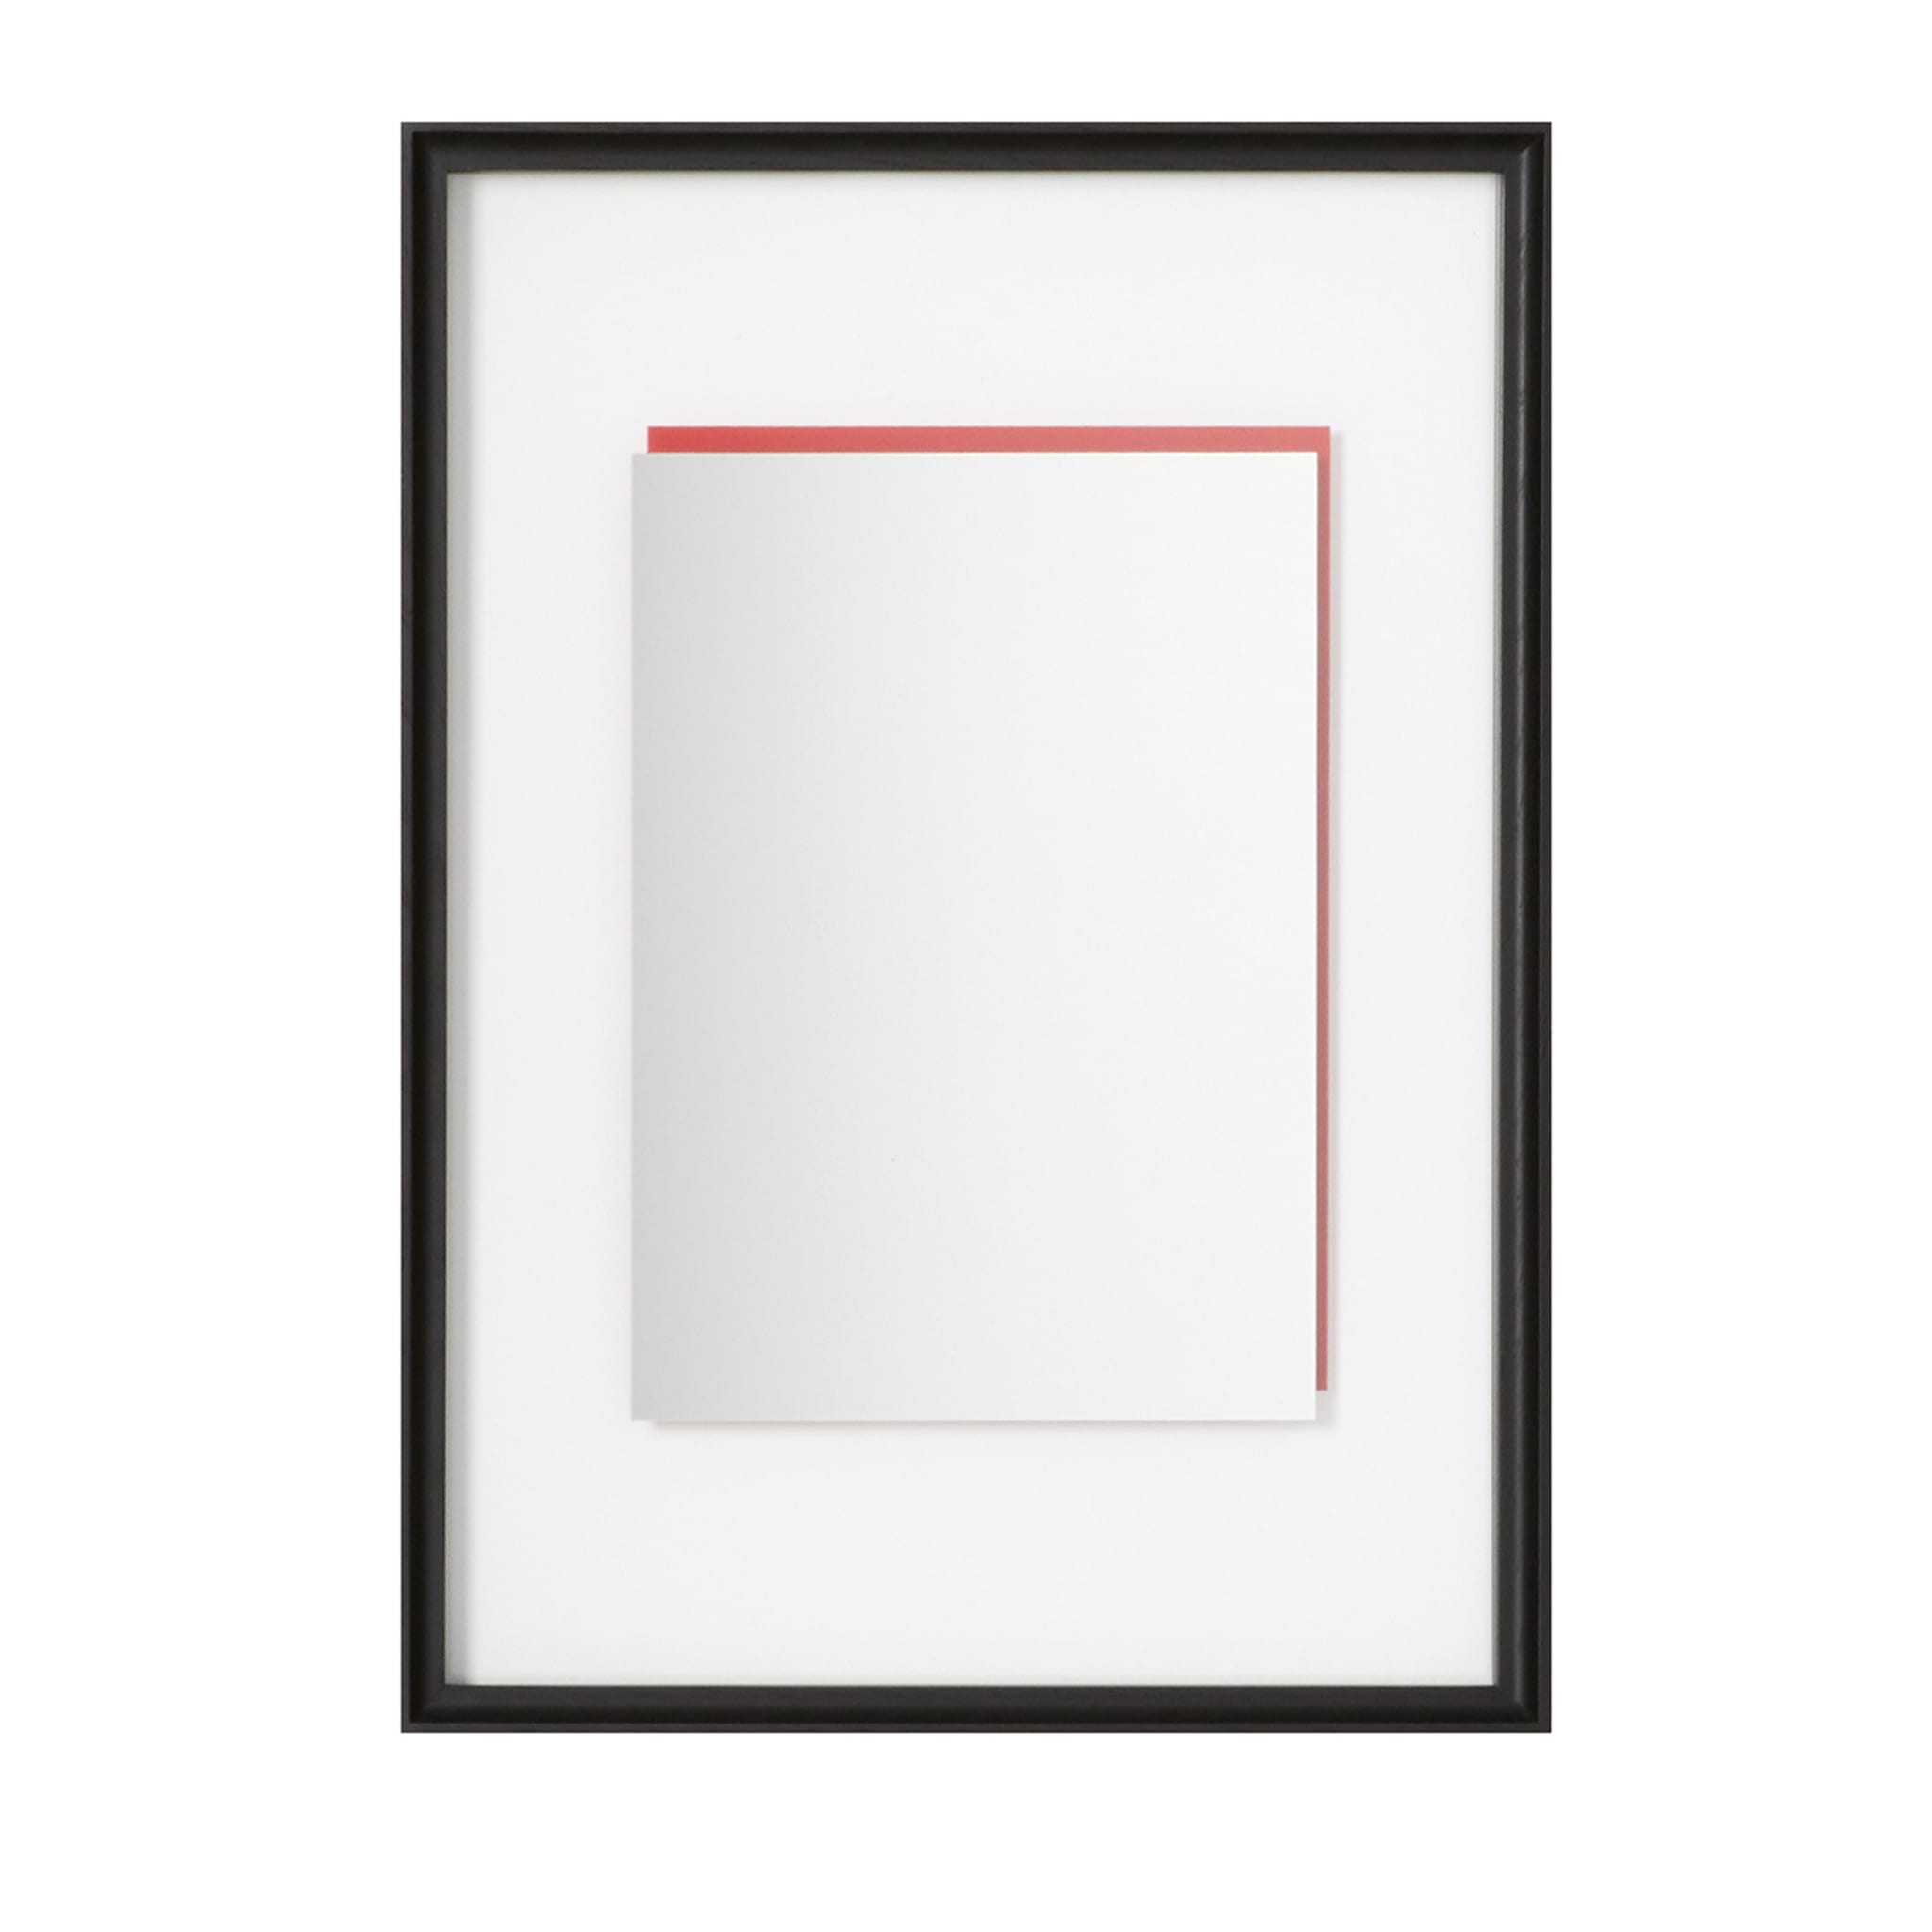 Deadline Who's Afraid of Red Rectangular mirror by Ron Gilad #2 - Main view